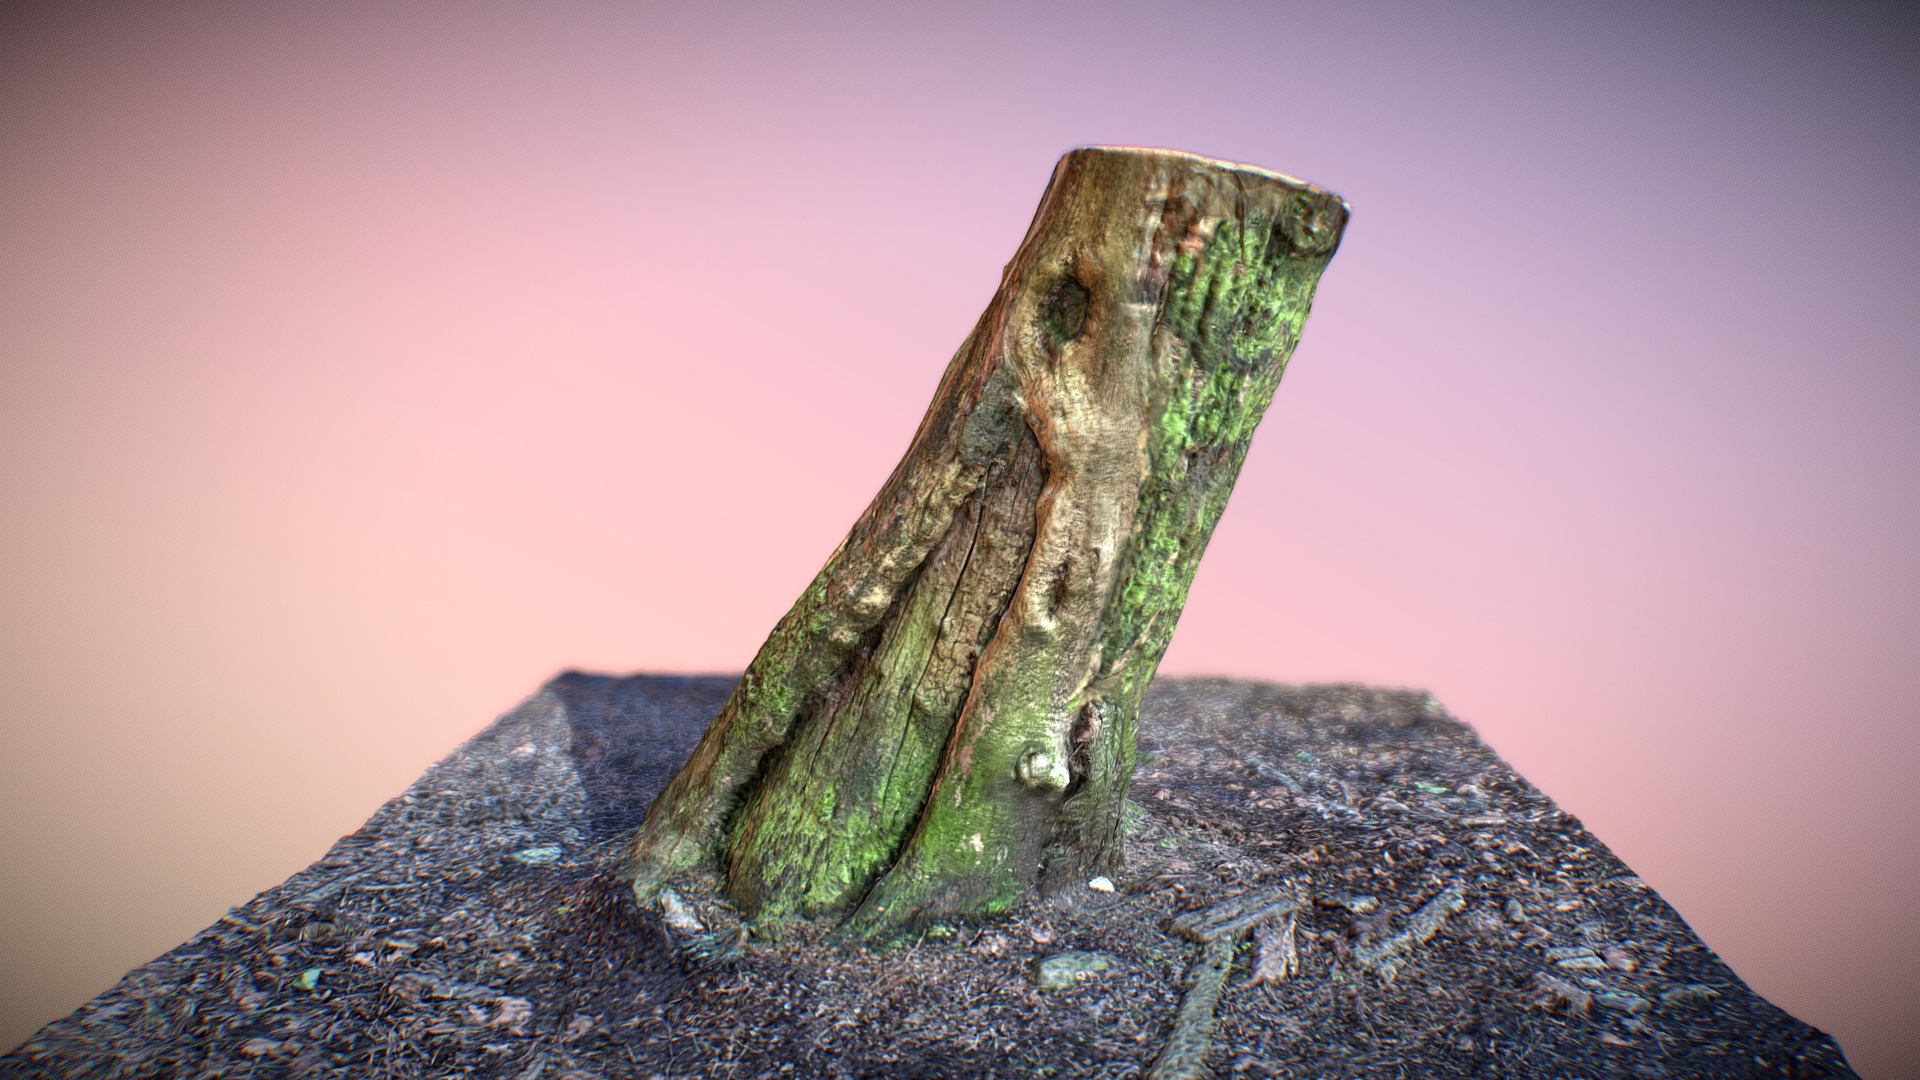 3D model Tree Trunk – 001 – High Poly – Maps 8192 by 8192 - This is a 3D model of the Tree Trunk - 001 - High Poly - Maps 8192 by 8192. The 3D model is about a close-up of a stone.